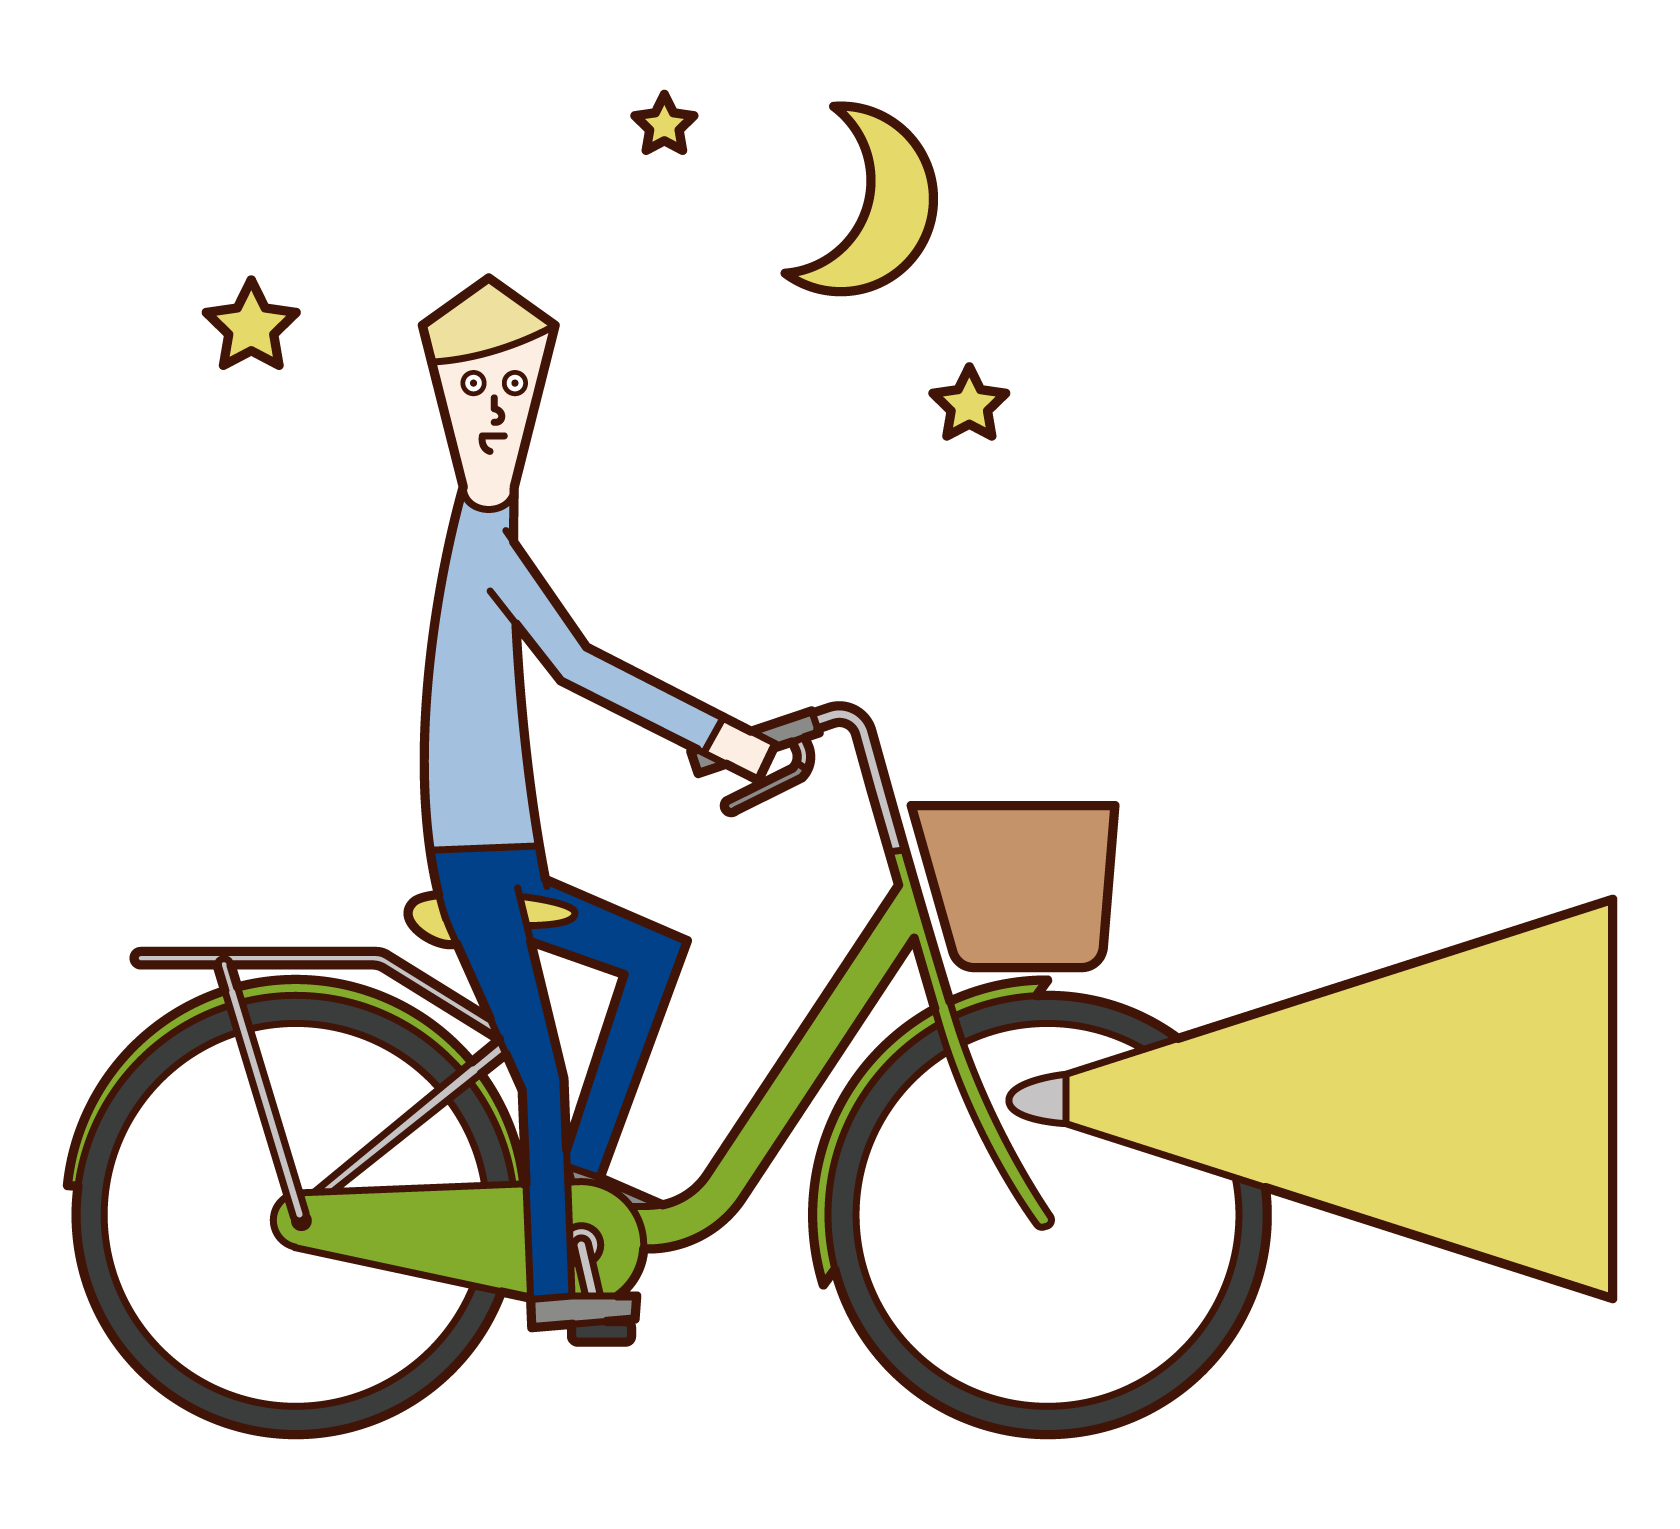 Illustration of a man driving a bicycle on a light at night